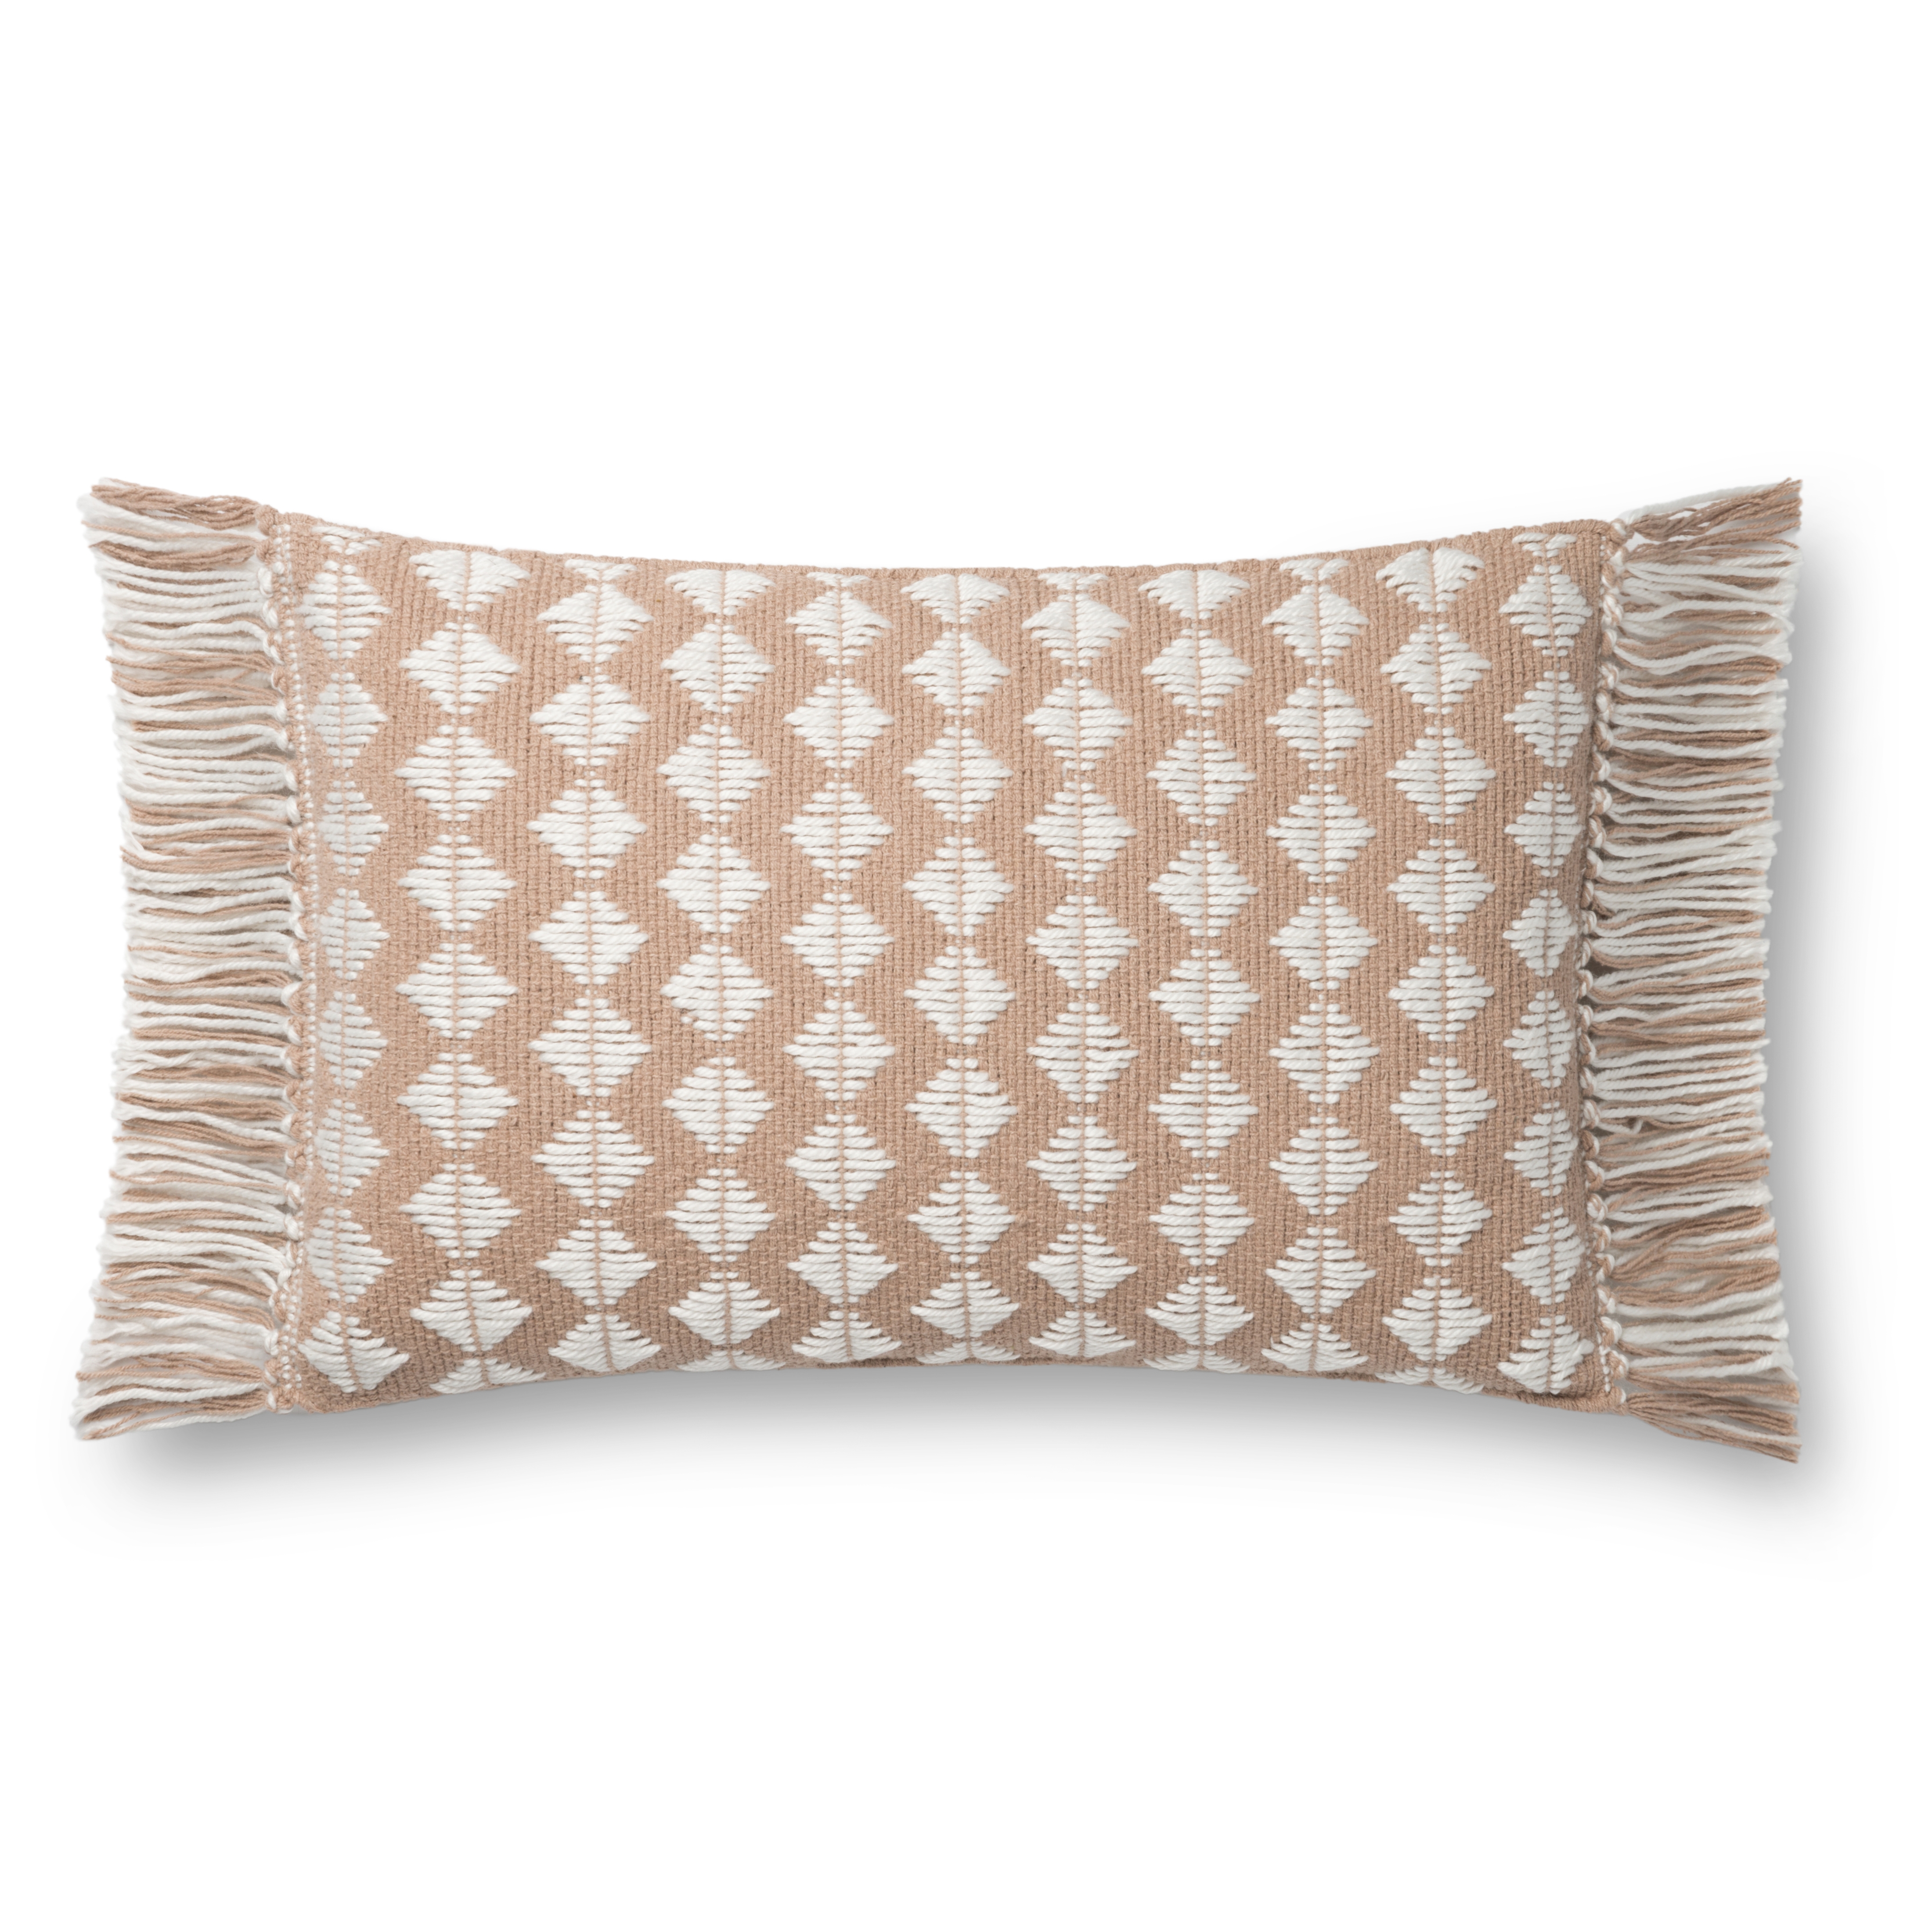 Magnolia Home by Joanna Gaines PILLOWS P1127 BLUSH / IVORY 13" x 21" Cover Only - Image 0